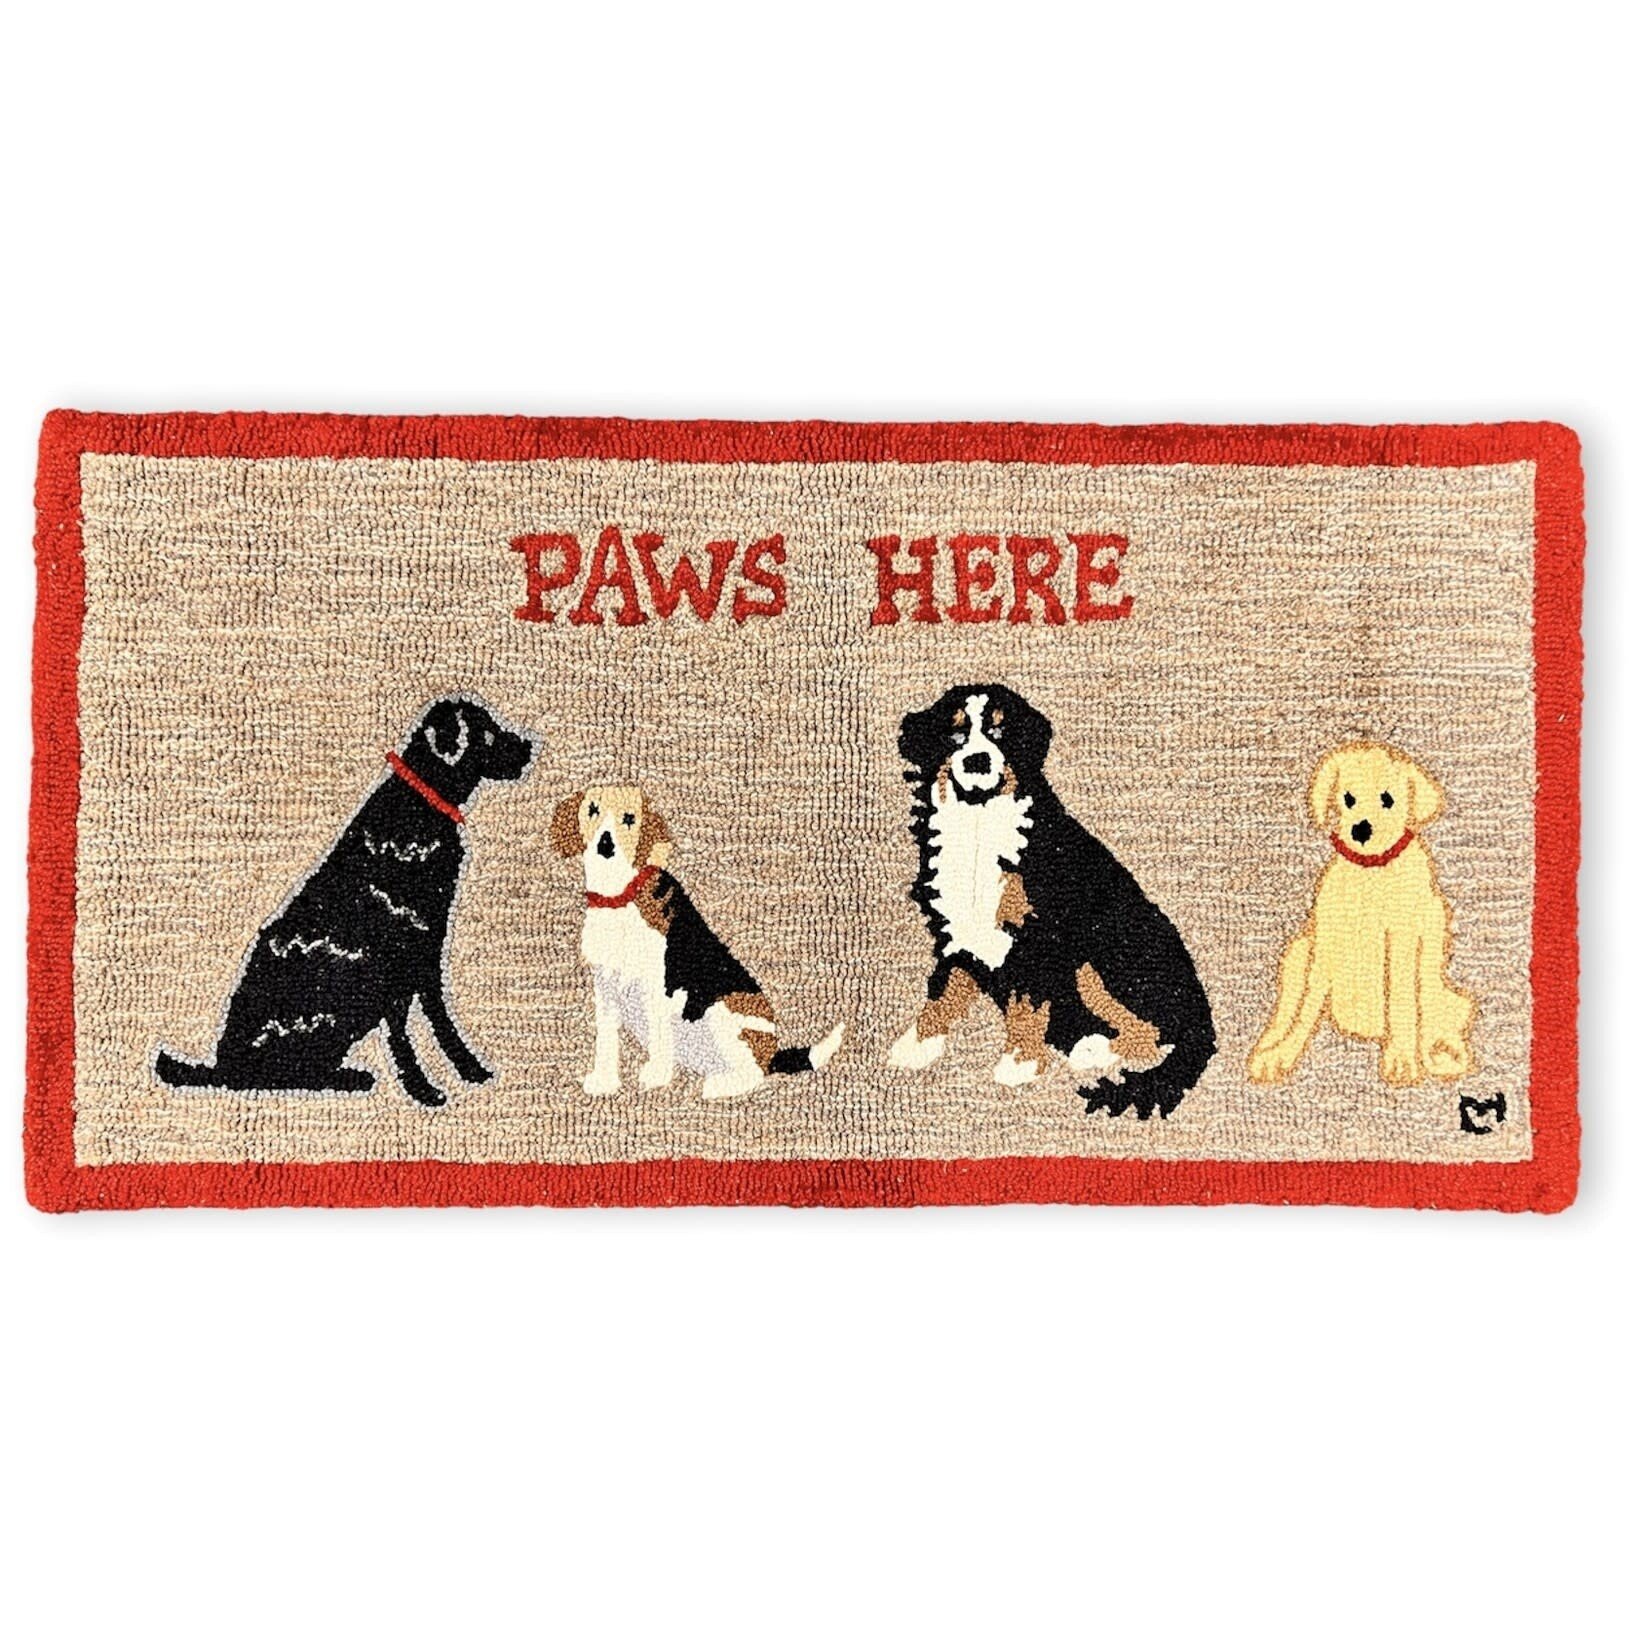 Paws Here Rug